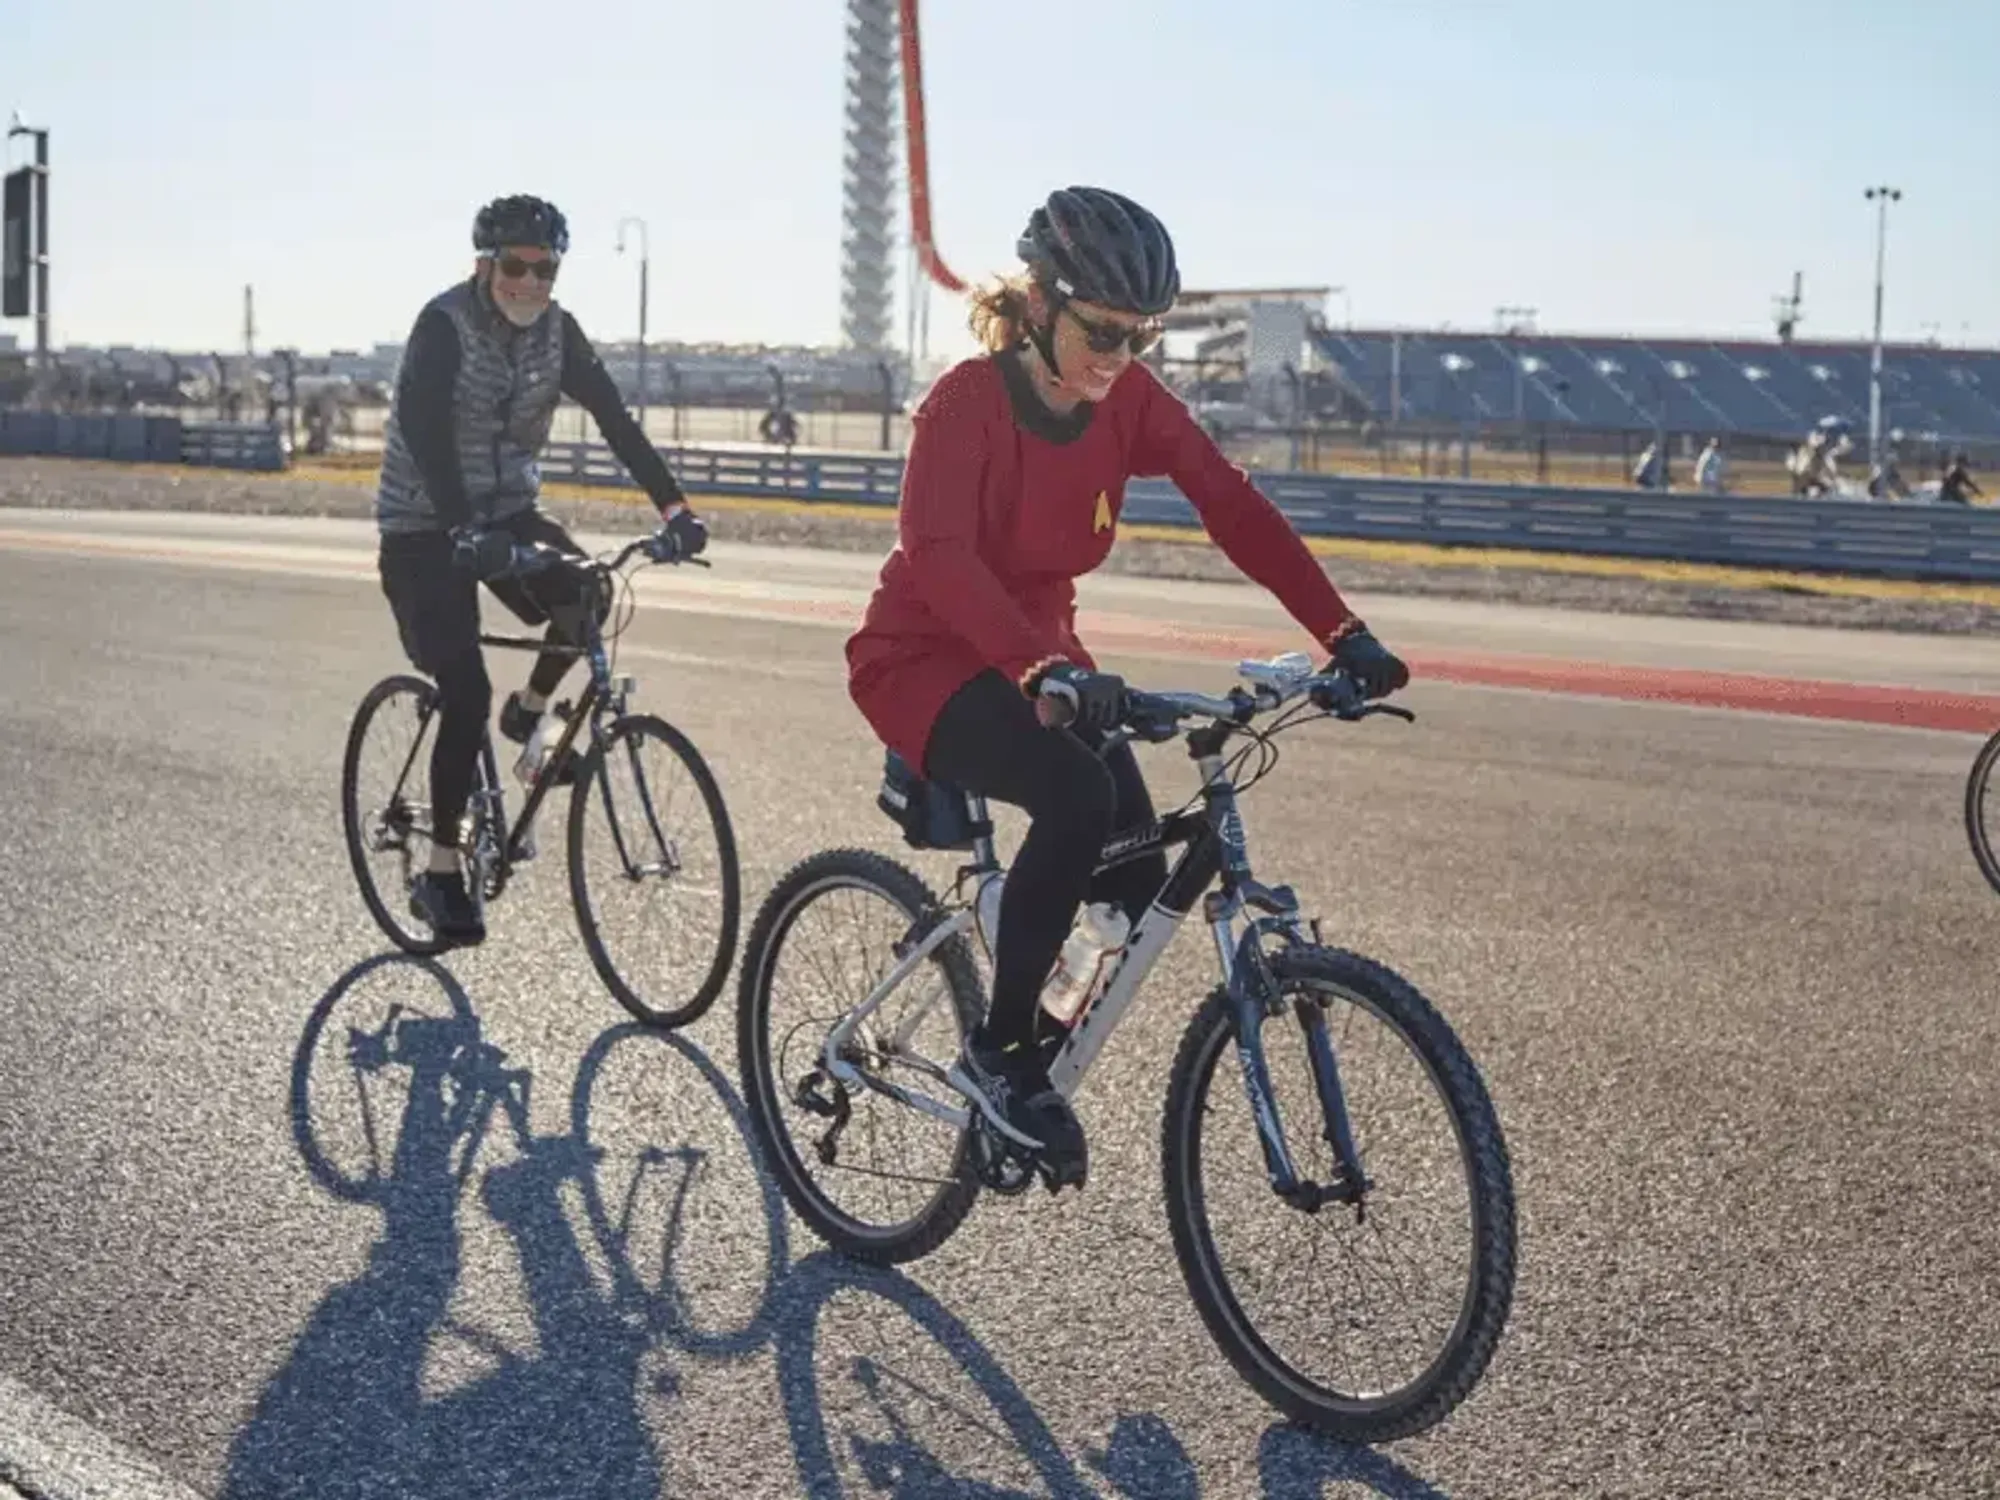 People riding bicycles on track at Circuit of the Americas